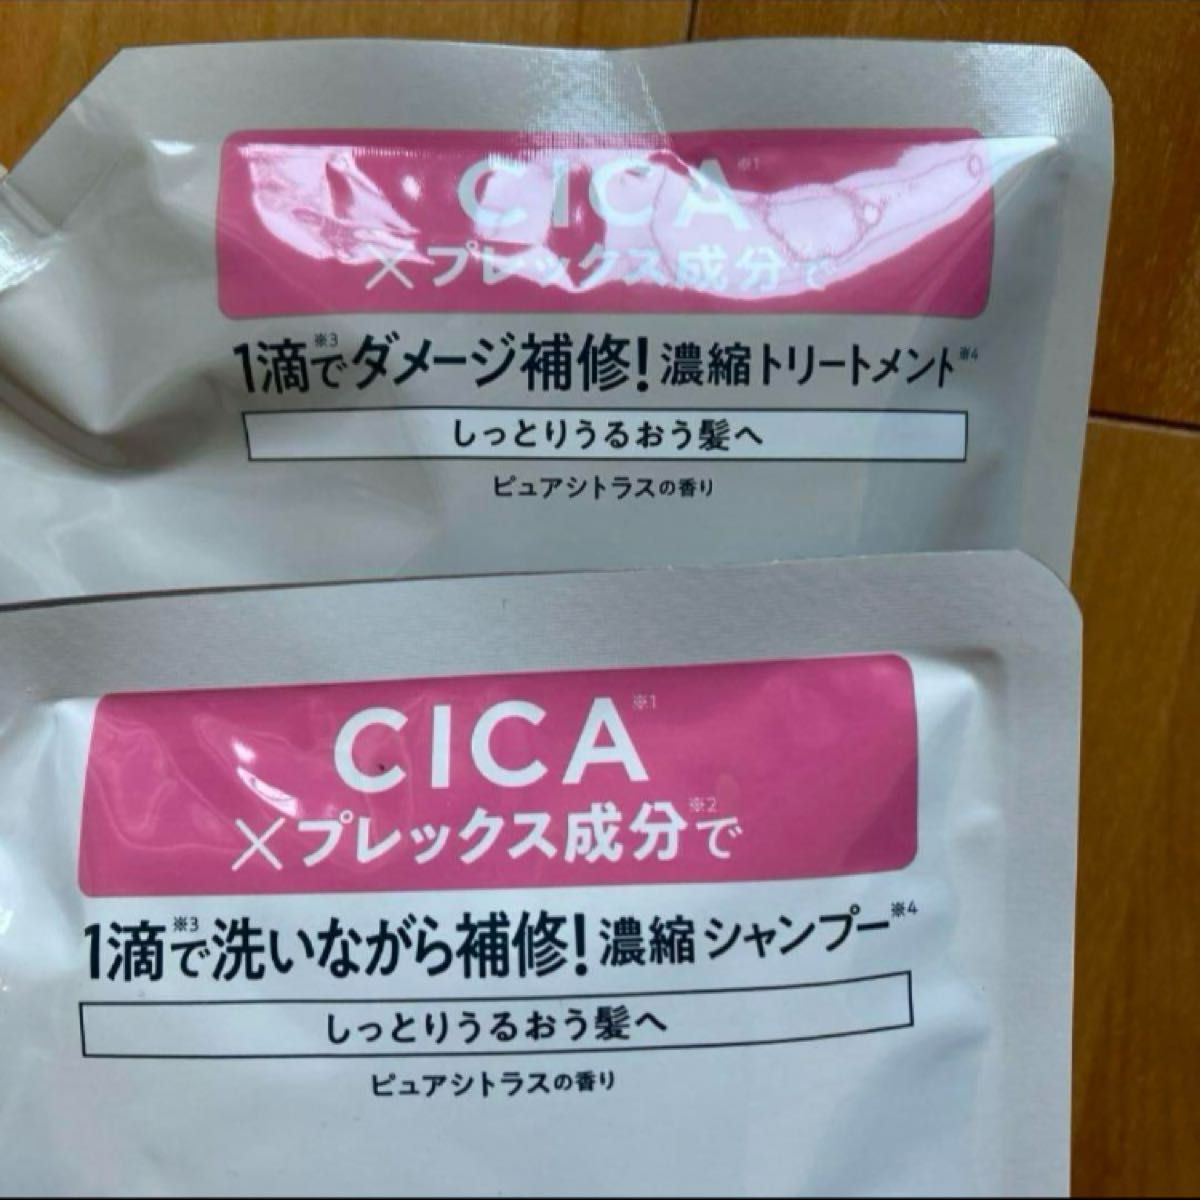 CICA HOLIC by Violet 濃縮シャンプー＆トリートメント詰め替えセット　一袋で詰め替え用約2本分